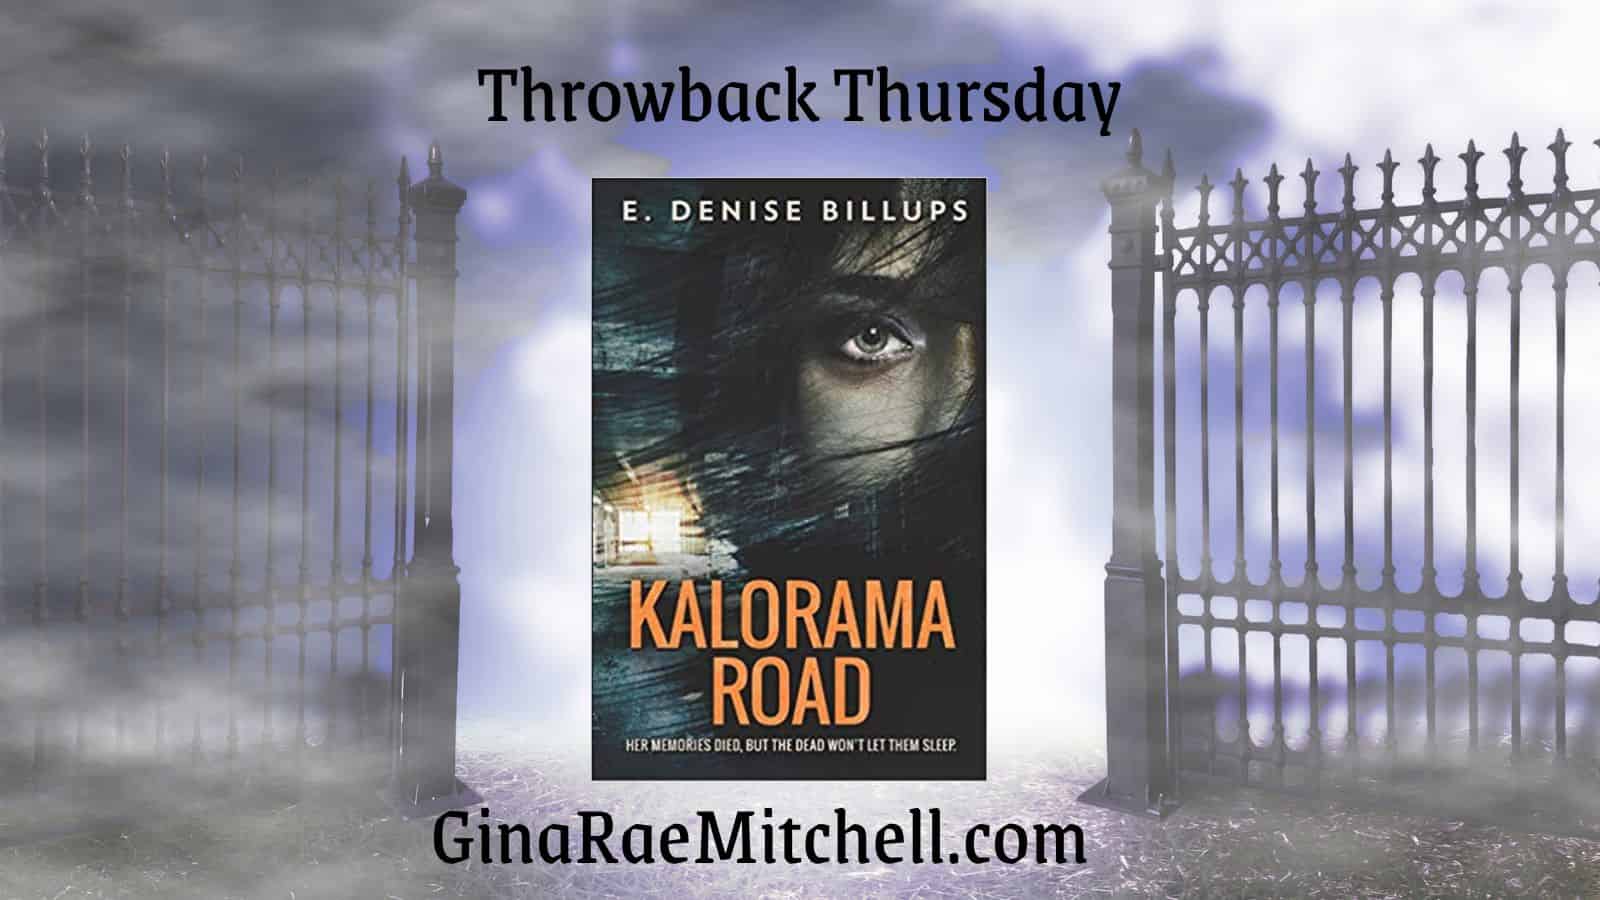 Kalorama Road by E. Denise Billups | Intense 5-Star #Mystery #PsychologicalThriller #ThrowbackThursday | Book Review Update Series